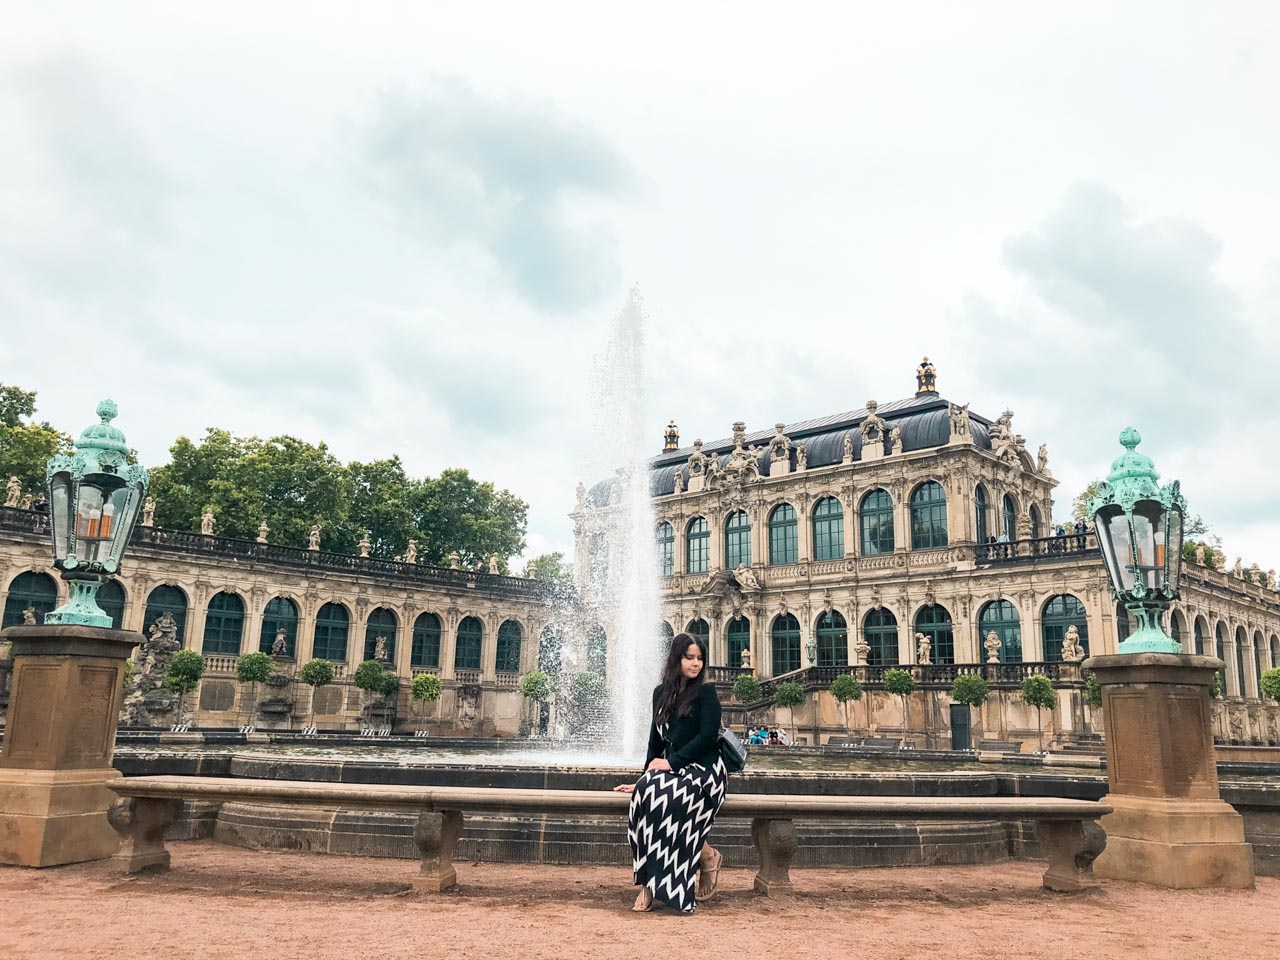 A woman in a maxi dress sitting on a bench in front of a fountain on Zwinger Square in Dresden